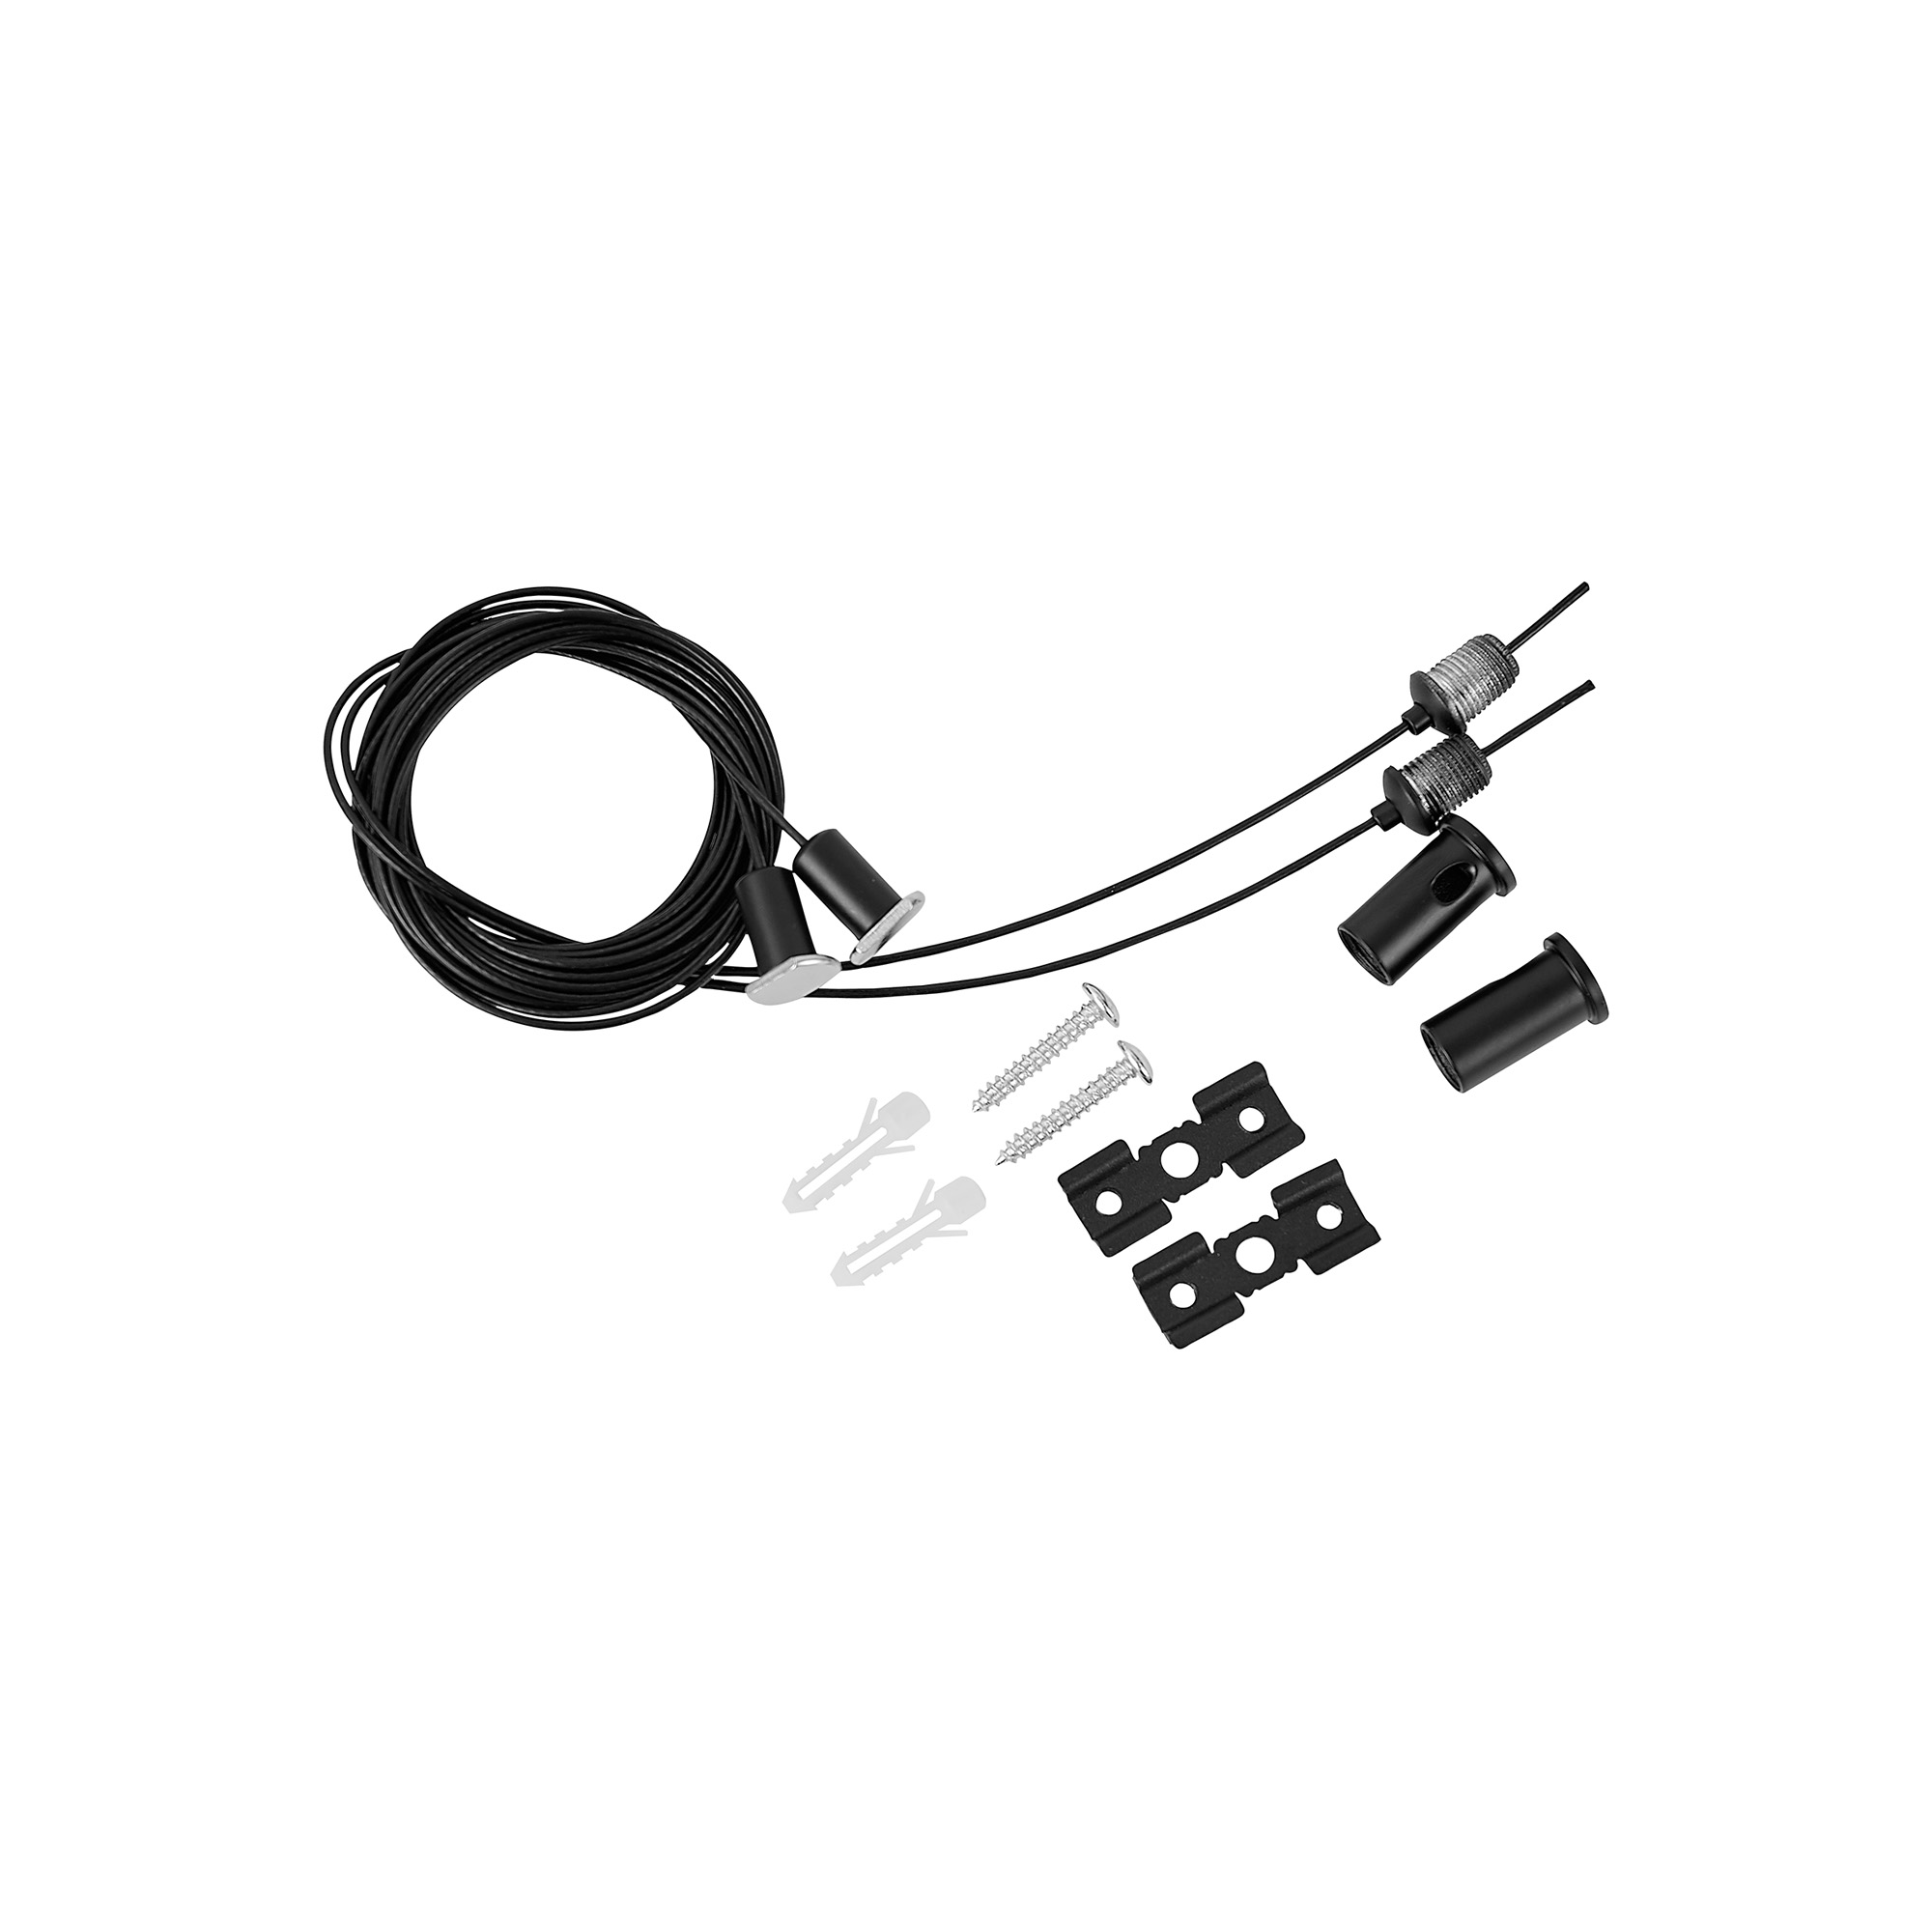 M8377  Magneto 2m Suspension Kit Black For All Types Of Surface Track (2 Pack)